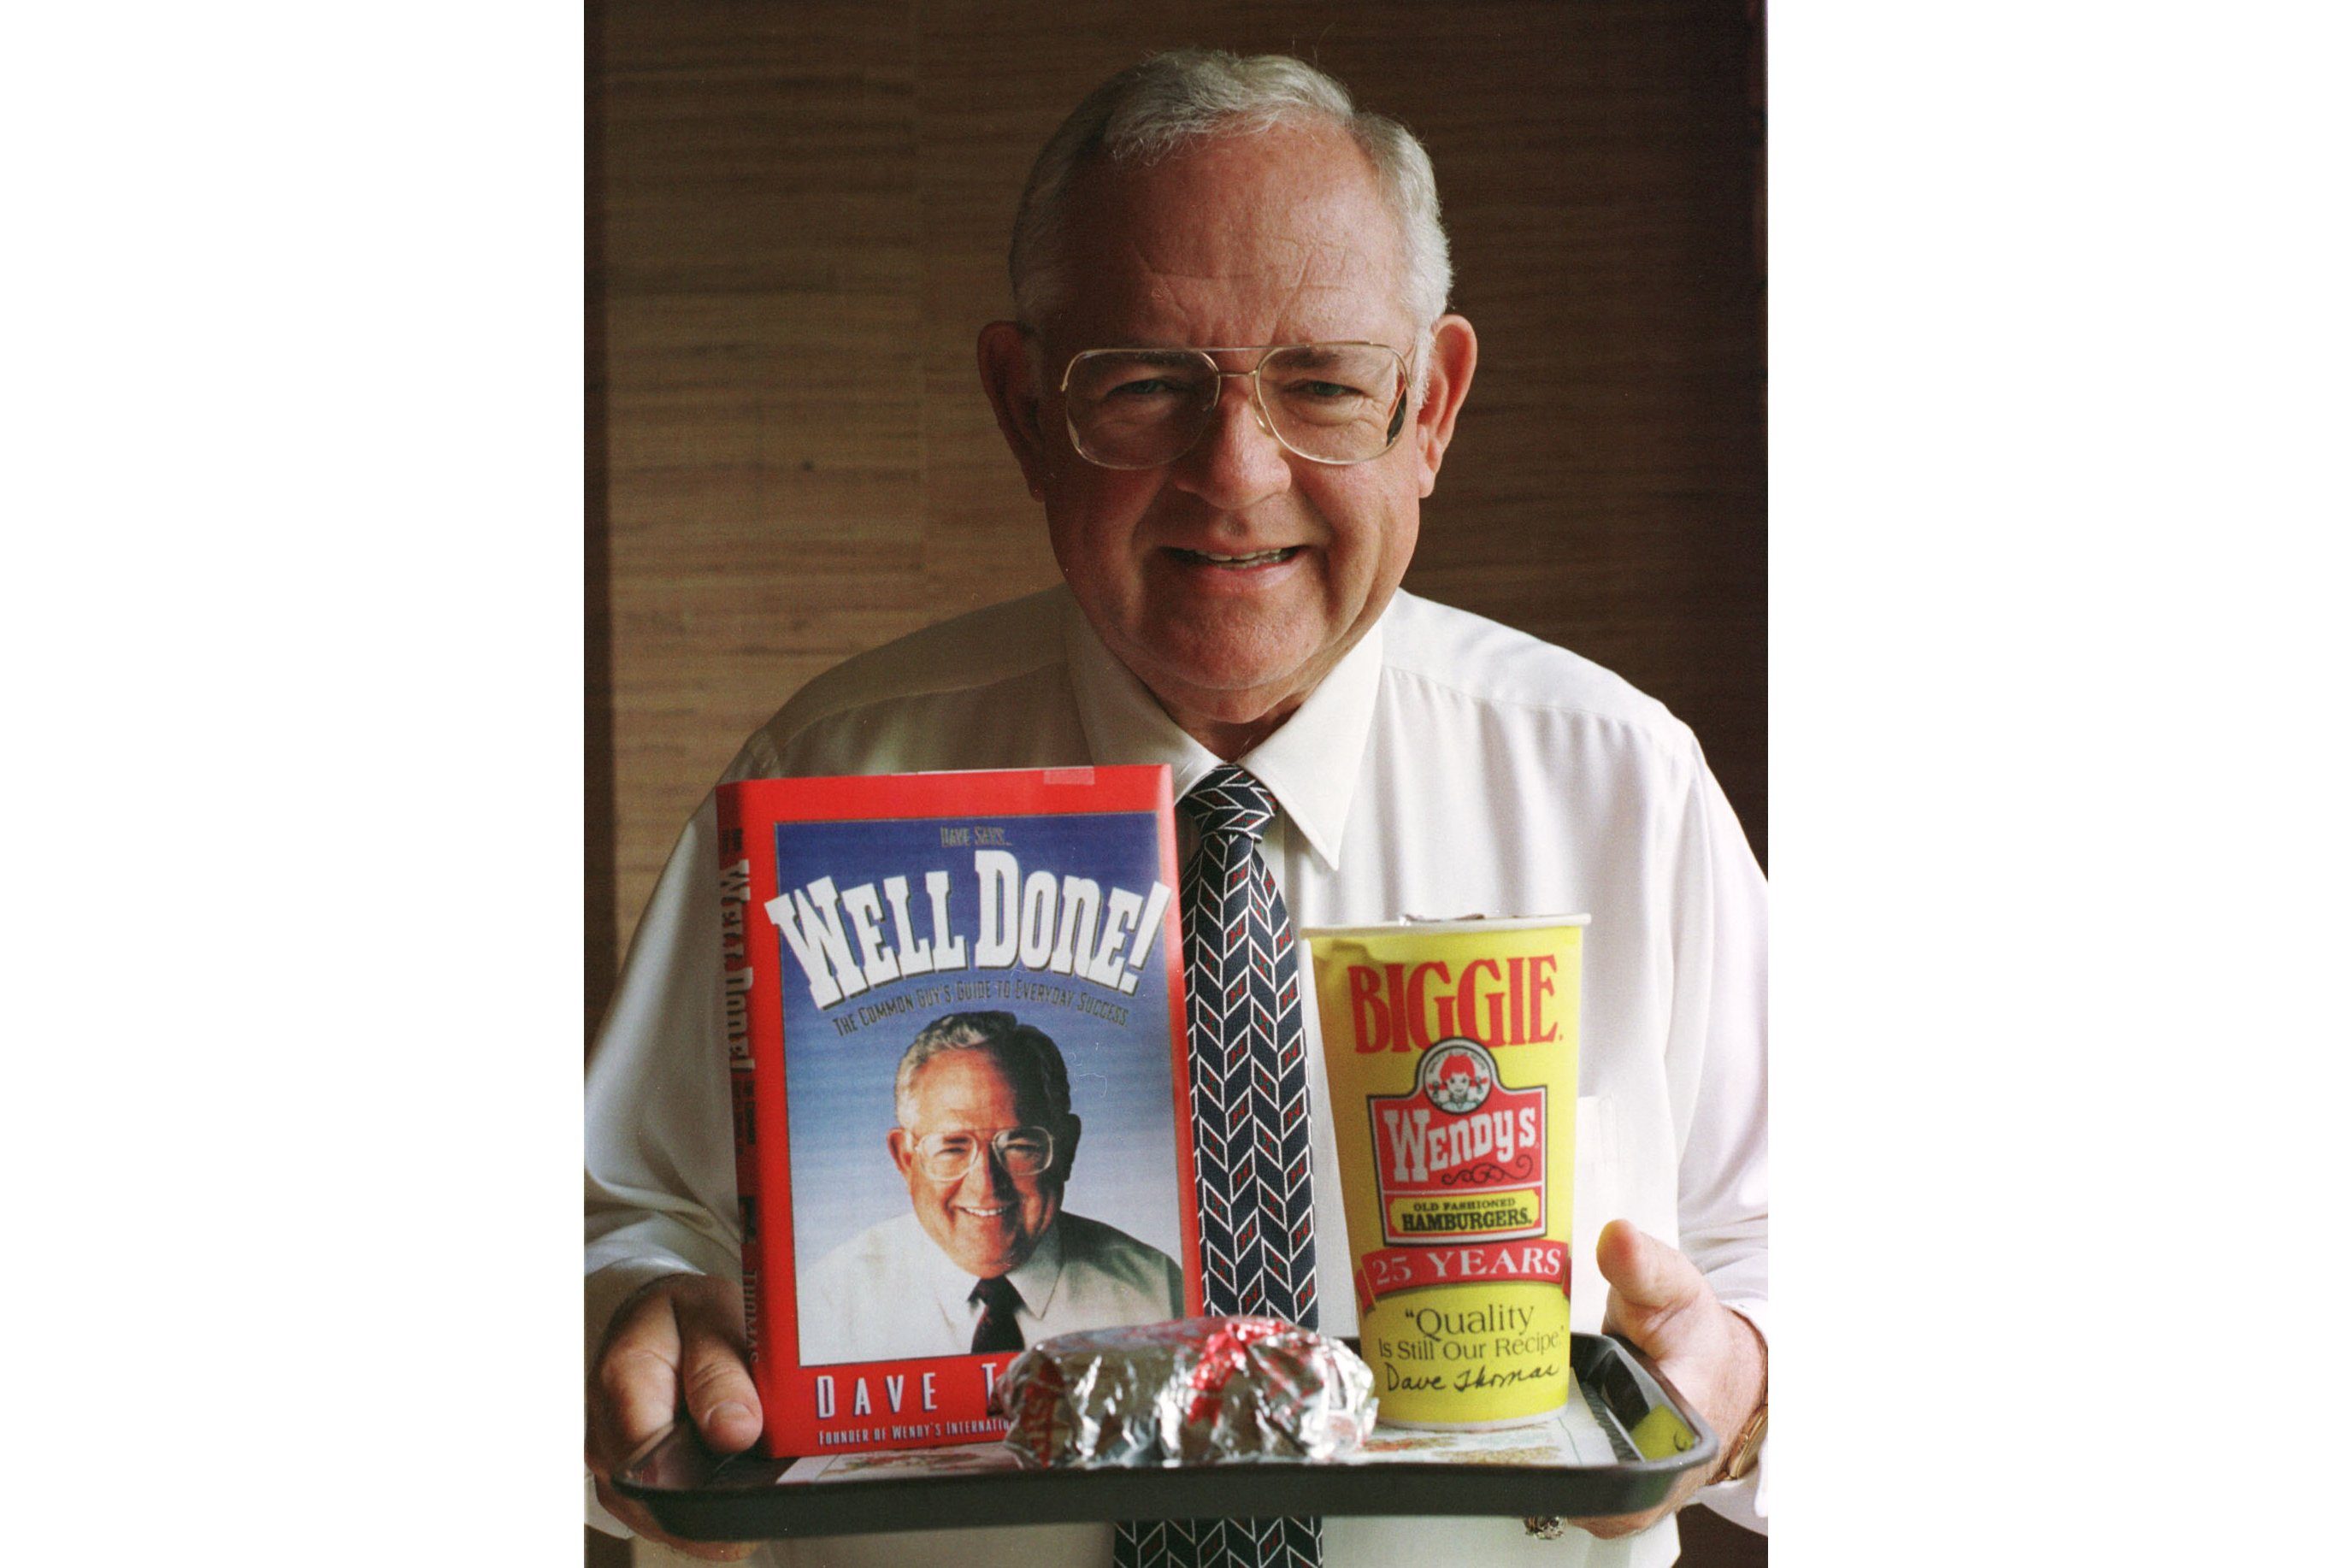 Mandatory Credit: Photo by Chris Kasson/AP/Shutterstock (6582617a) THOMAS Dave Thomas, is shown in this 1994 photo, died around midnight at his home in Fort Lauderdale, Fla., according to Wendy's the company he founded. Thomas, whose homespun ads built Wendy's Old-Fashioned Hamburgers into one of the world's most successful fast-food franchises, had been undergoing dialysis for a kidney problem since early 2001. Thomas had quadruple heart bypass surgery in December 1996 WENDYS DAVE THOMAS, COLUMBUS, USA